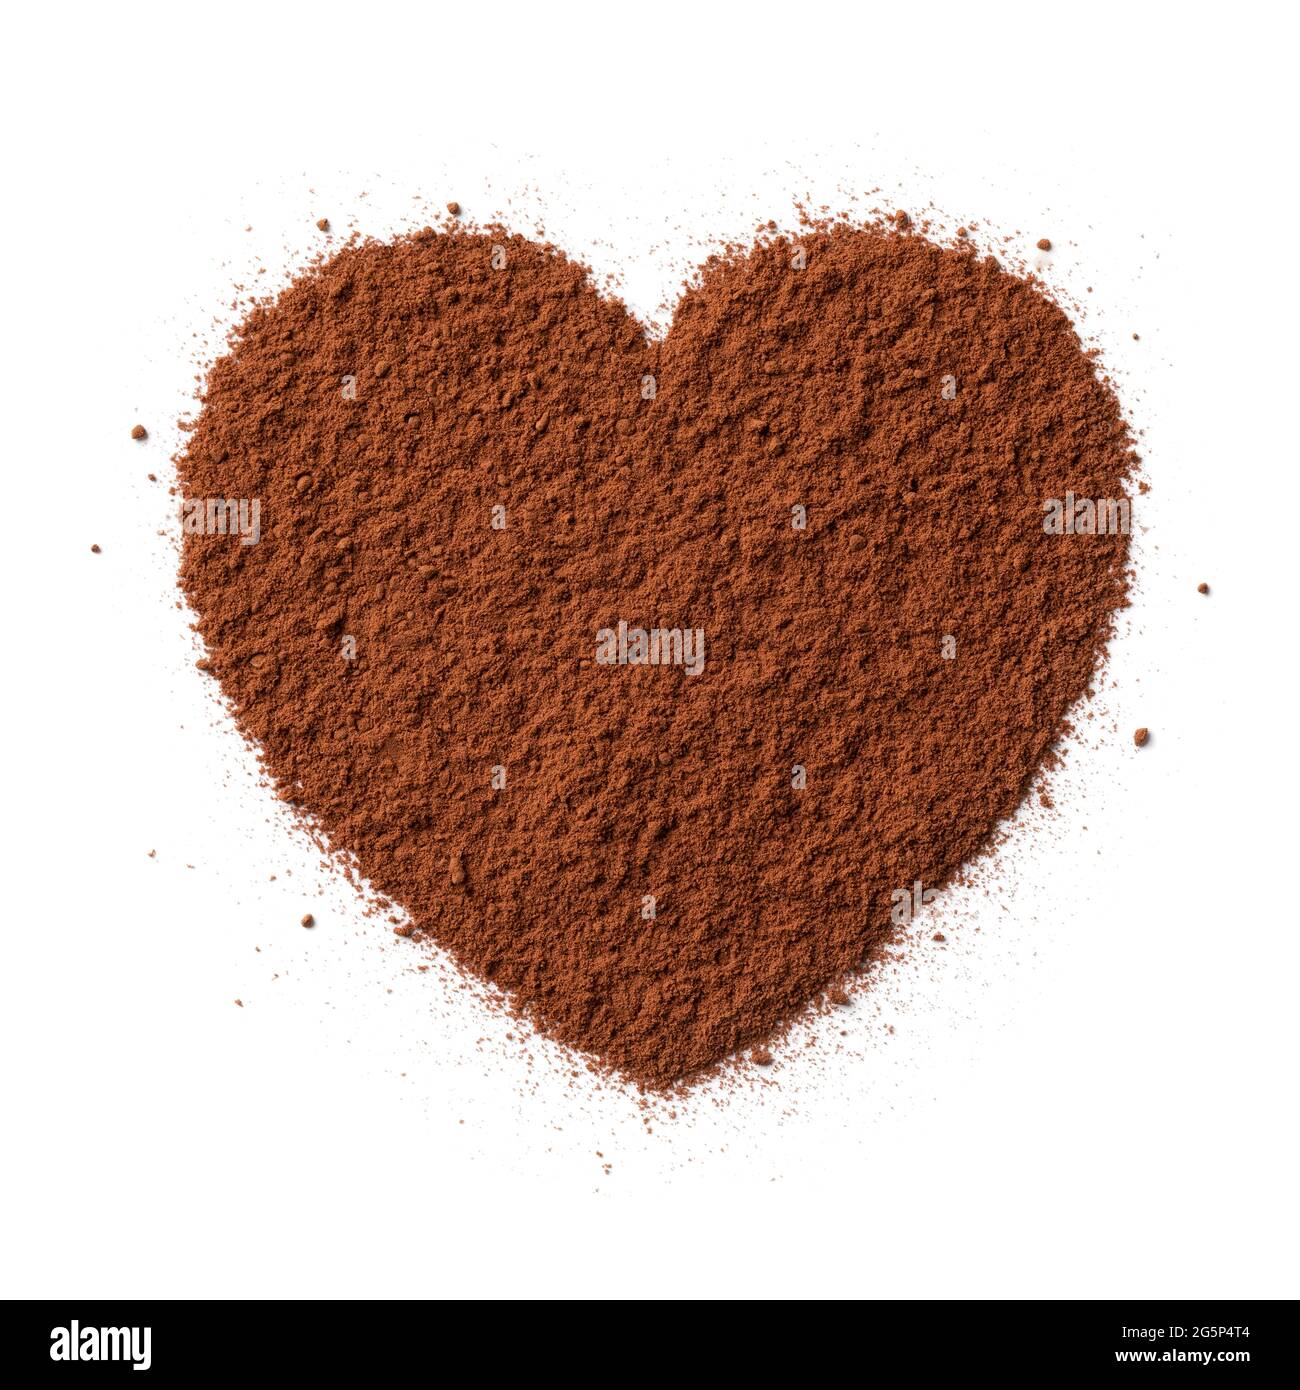 Brown cocoa powder in heart shape isolated on white background Stock Photo